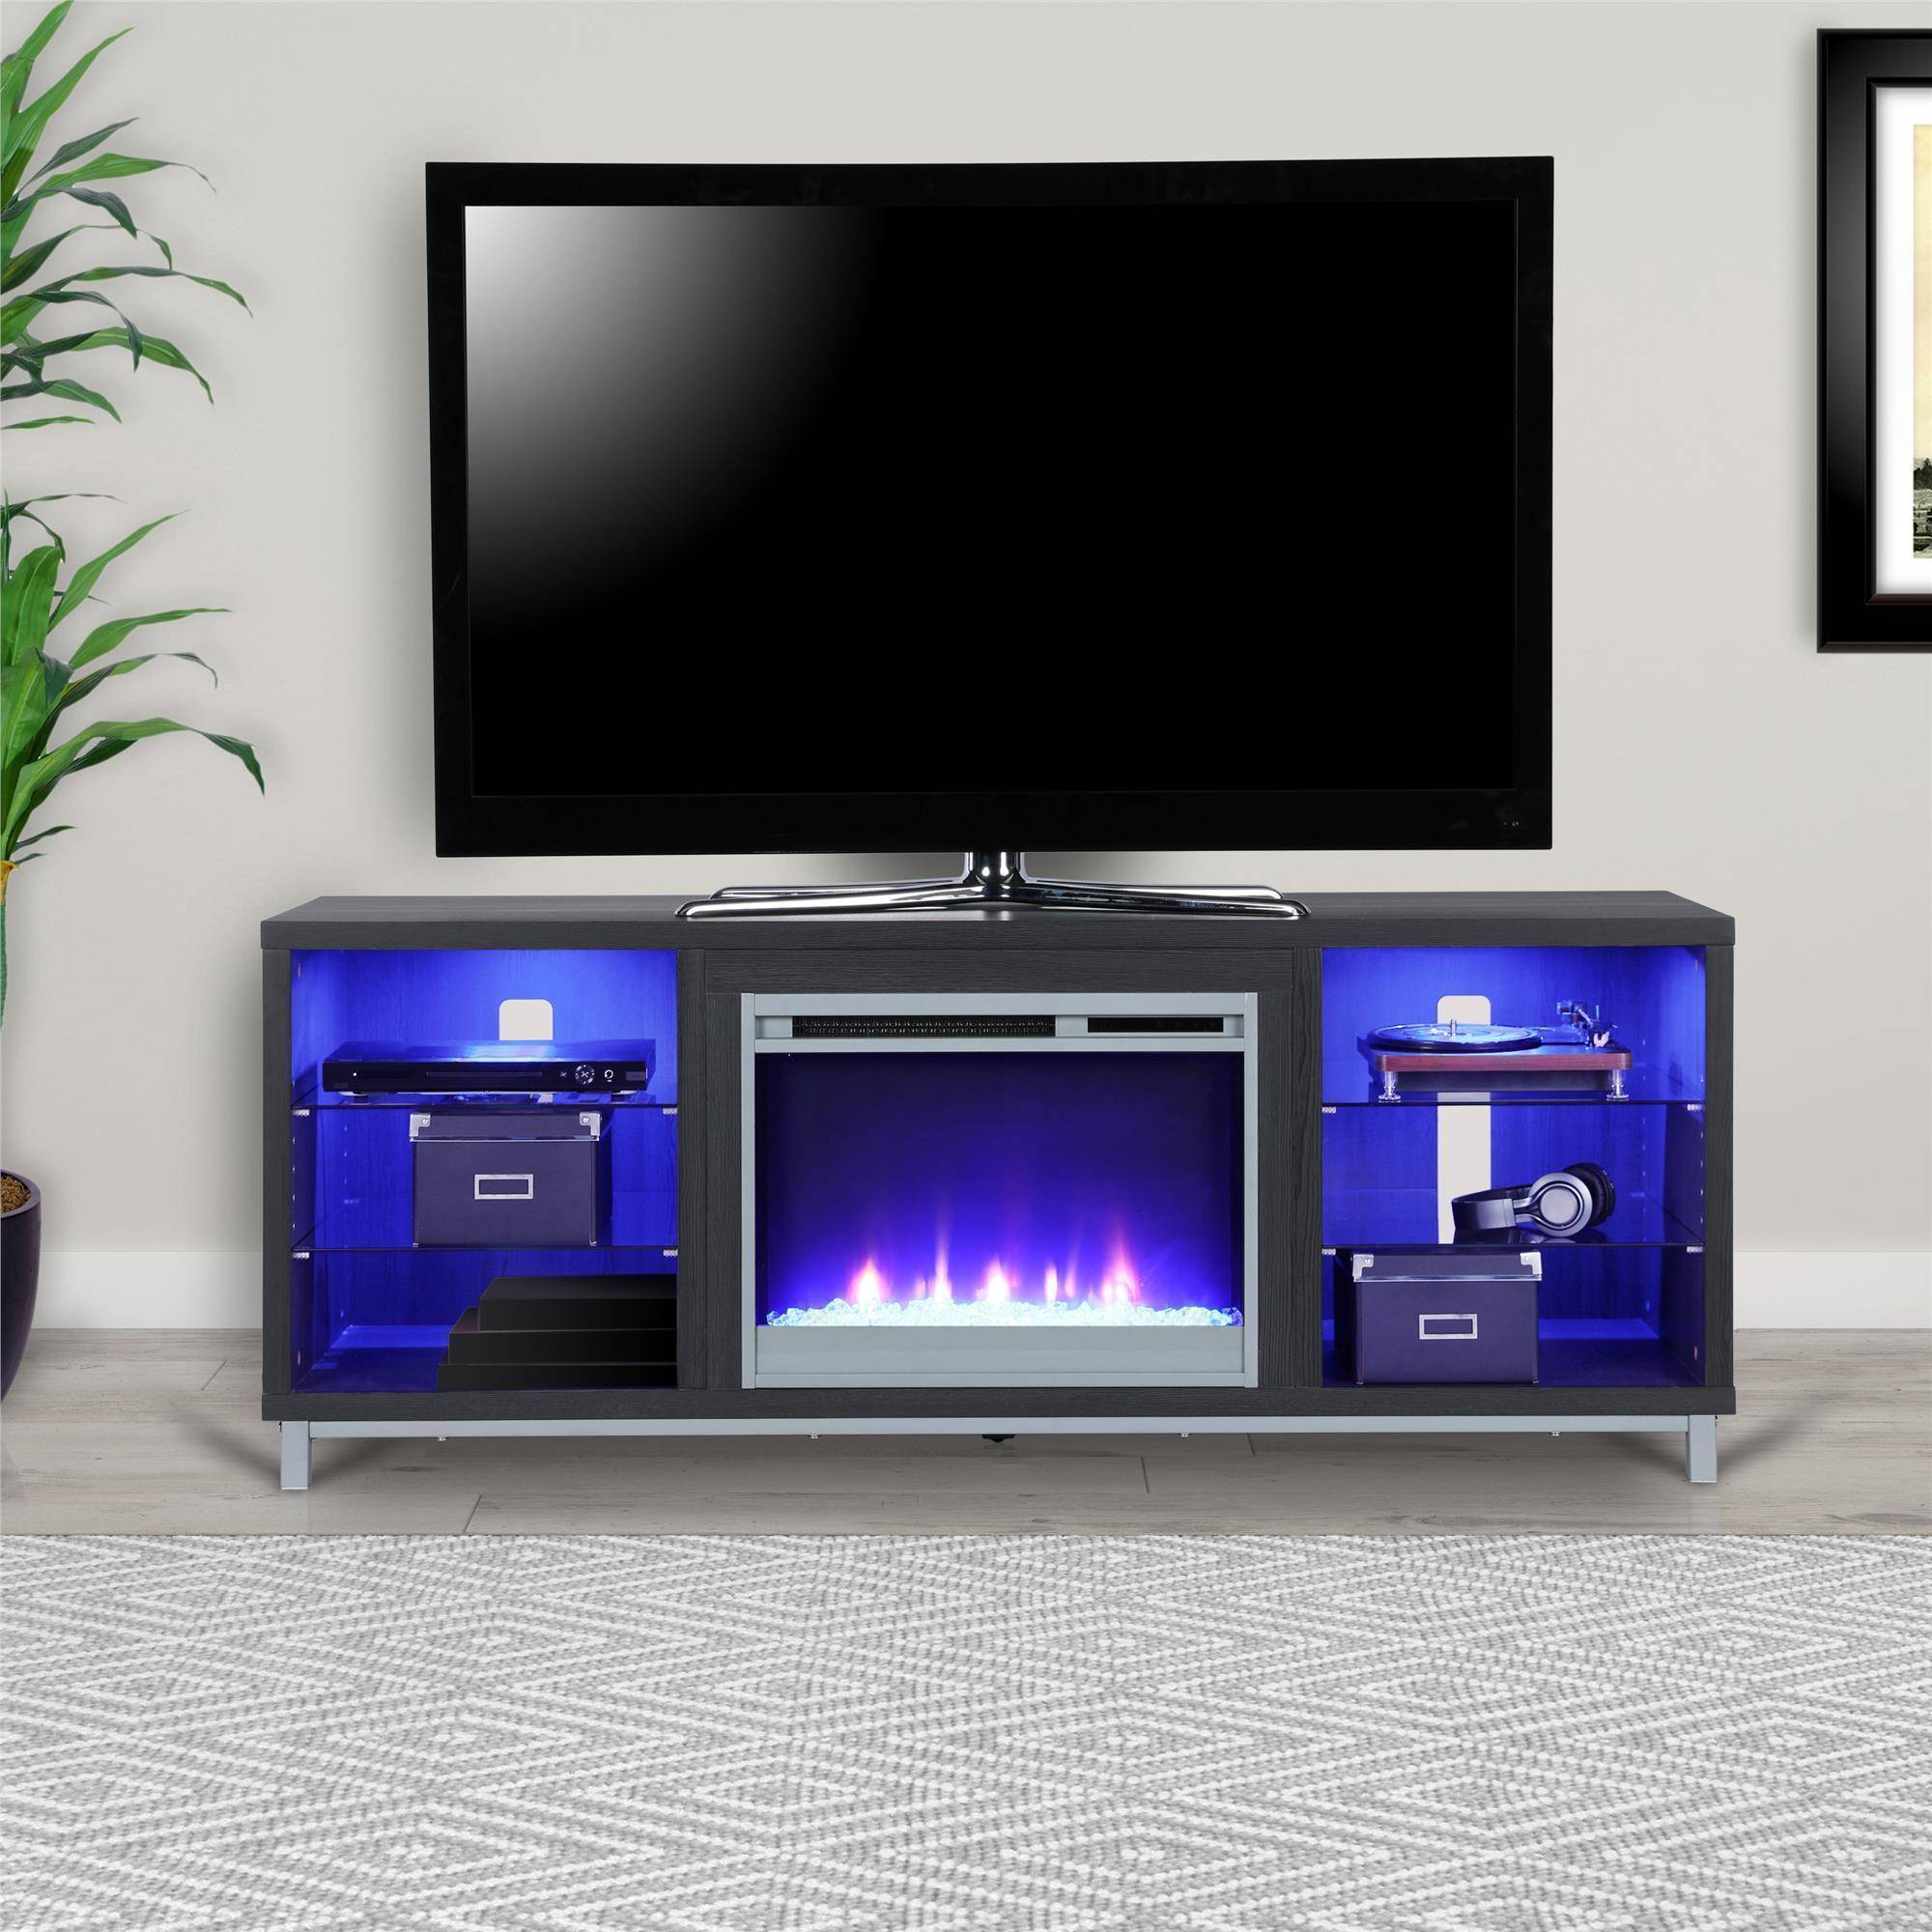 Fireplace Tv Stand for 55 Inch Tv Awesome Ameriwood Home Lumina Fireplace Tv Stand for Tvs Up to 70" Wide Black Oak Walmart